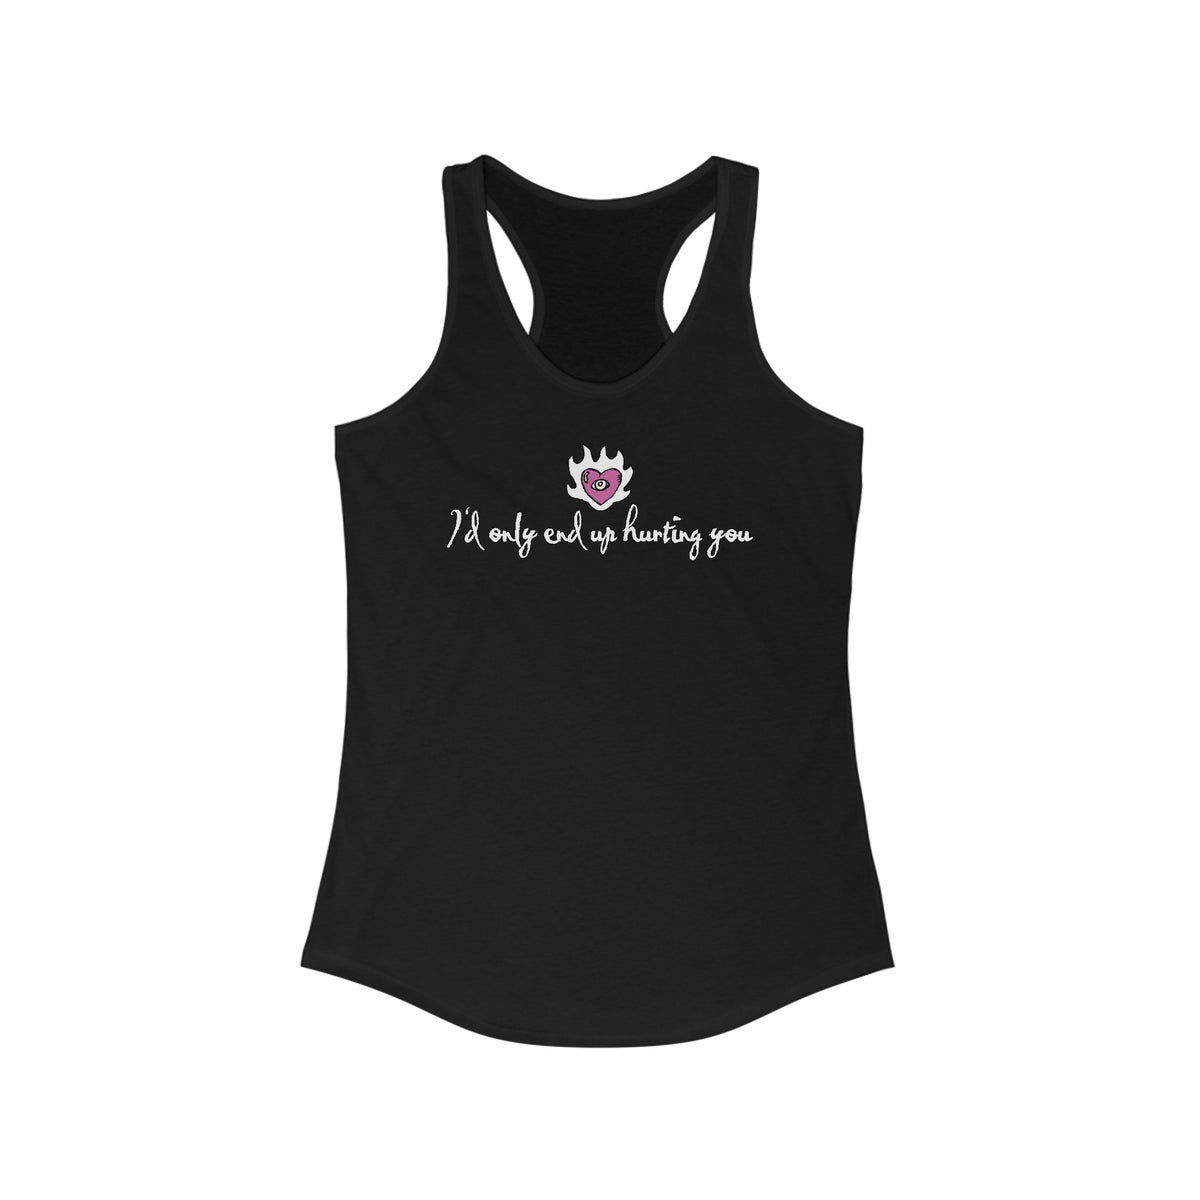 I'D Only End Up Hurting You - Women's Racerback Tank